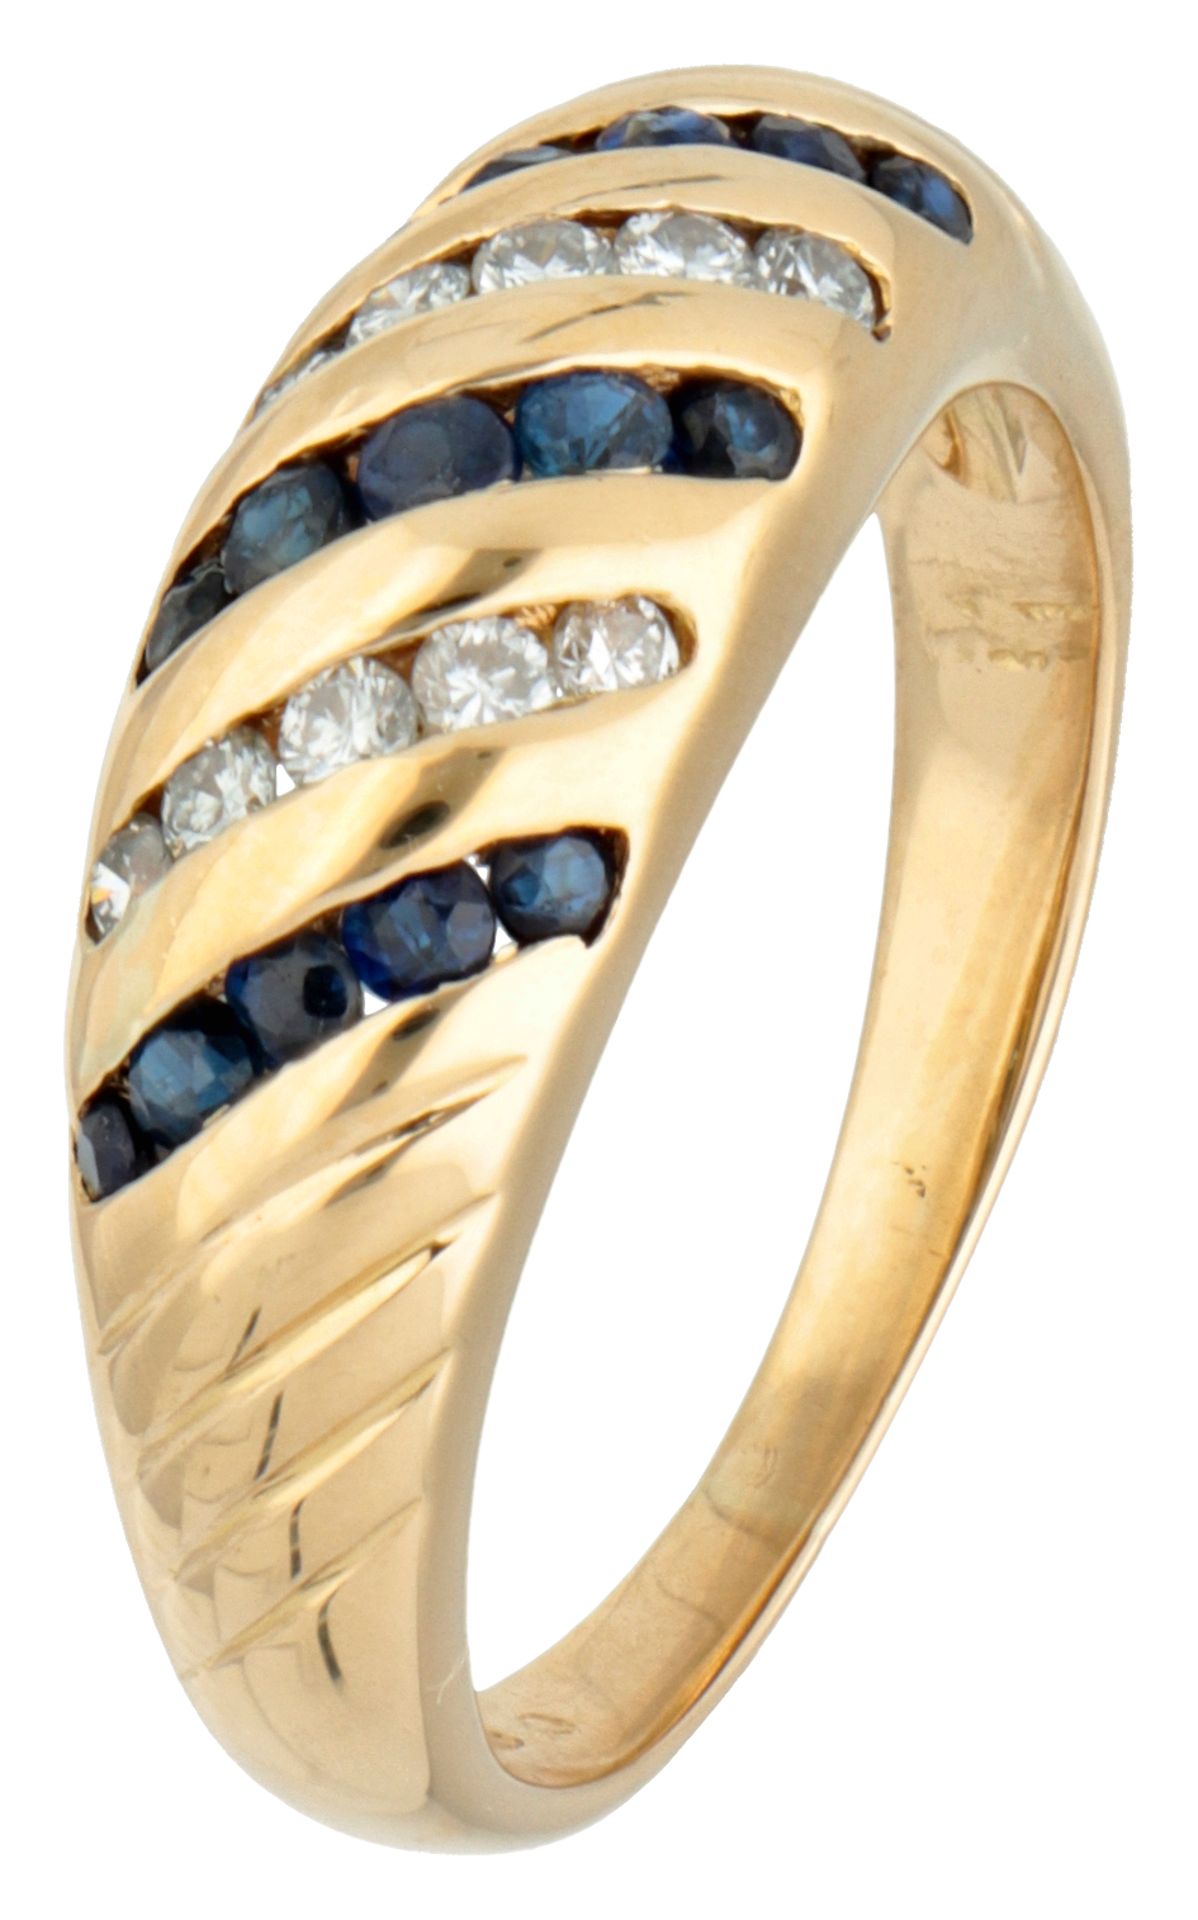 18K Yellow gold ring set with diamond and sapphire.